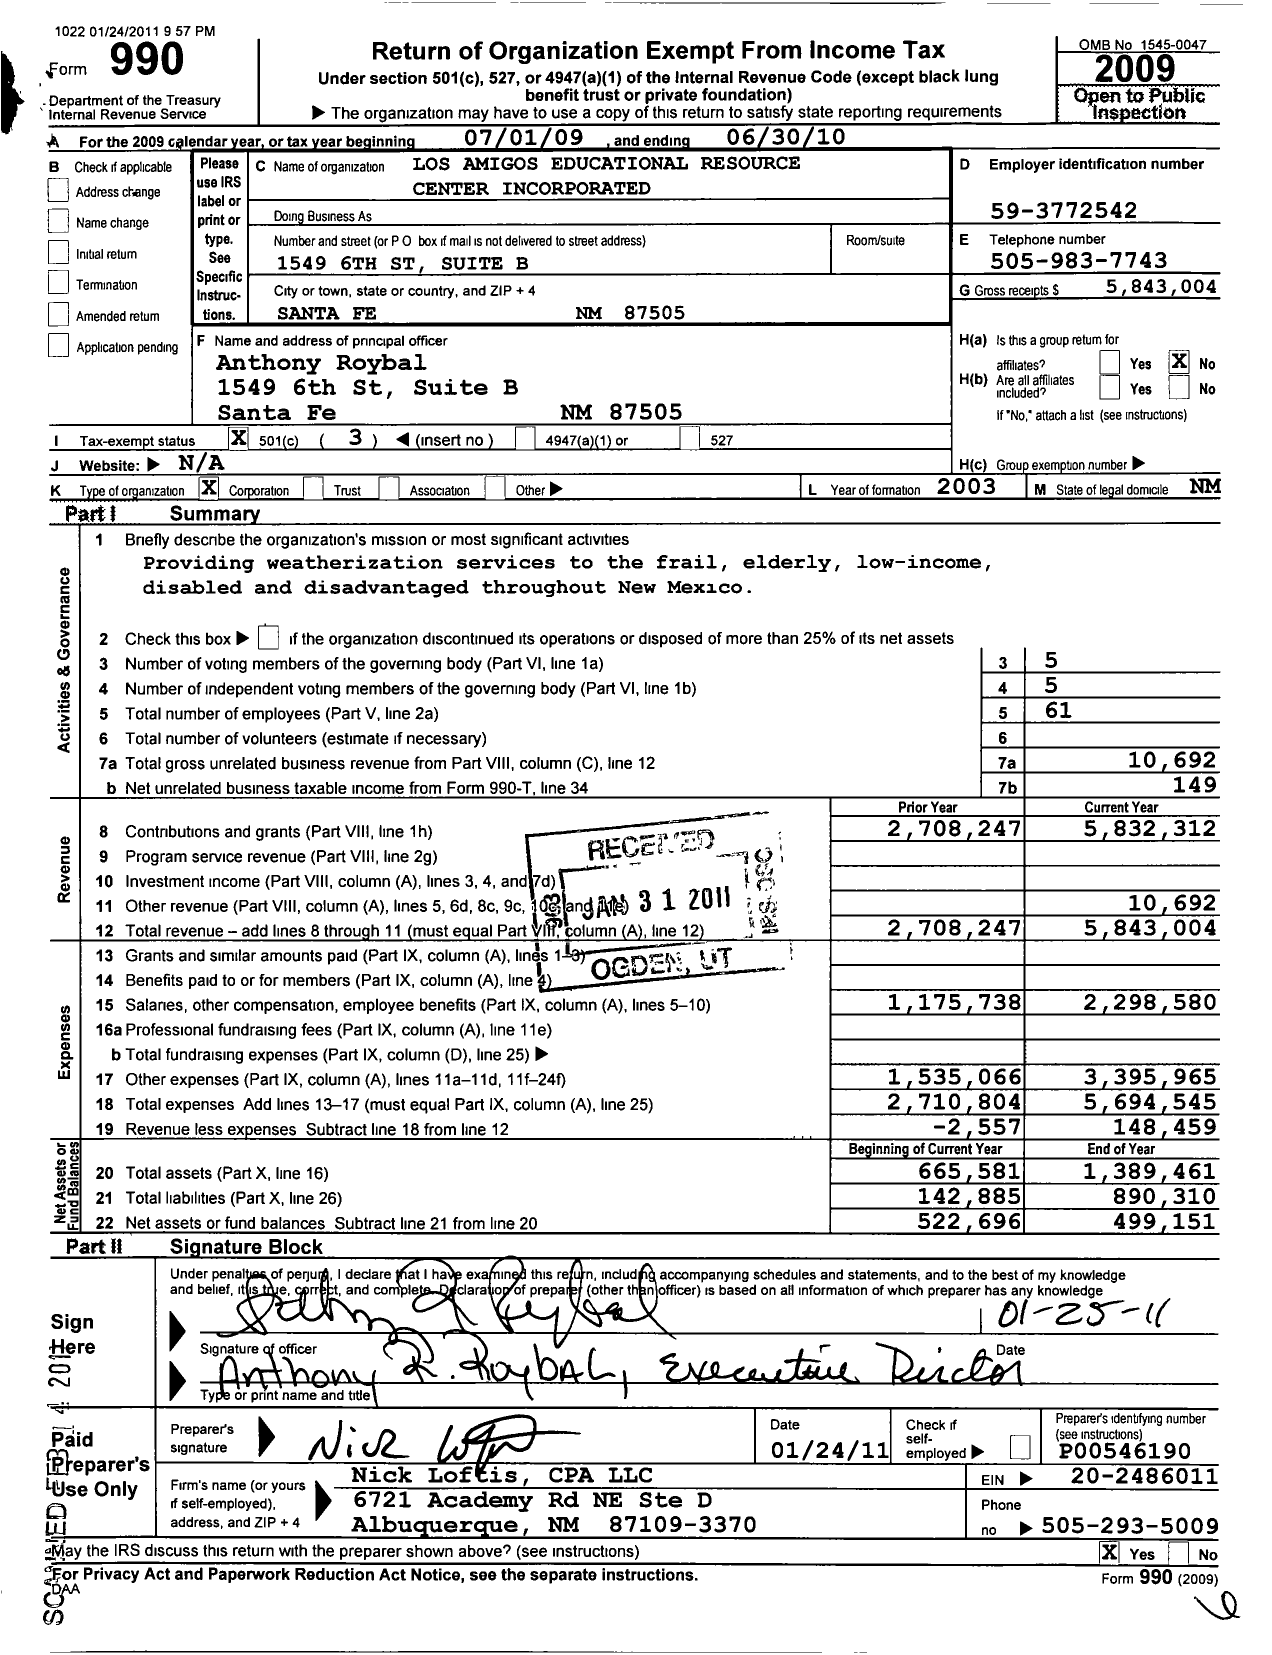 Image of first page of 2009 Form 990 for Los Amigos Educational Resource Center Incorporated